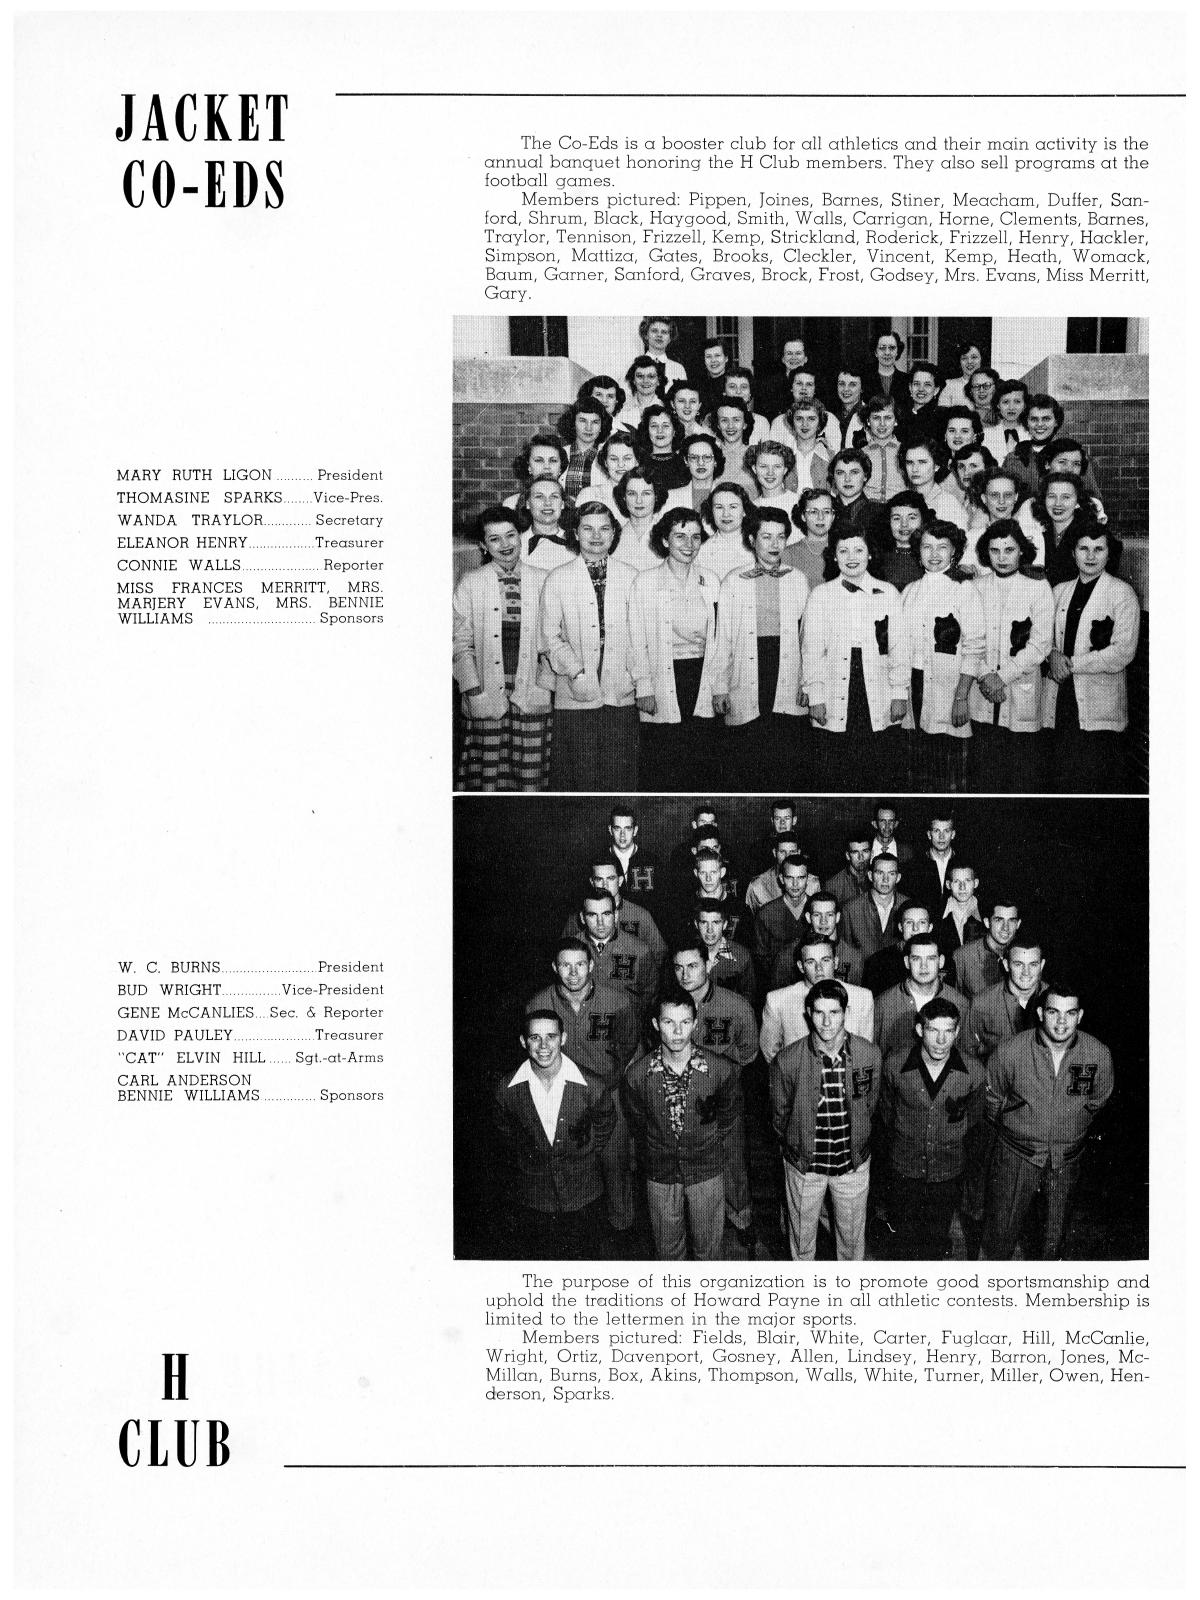 The Lasso, Yearbook of Howard Payne College, 1952
                                                
                                                    73
                                                